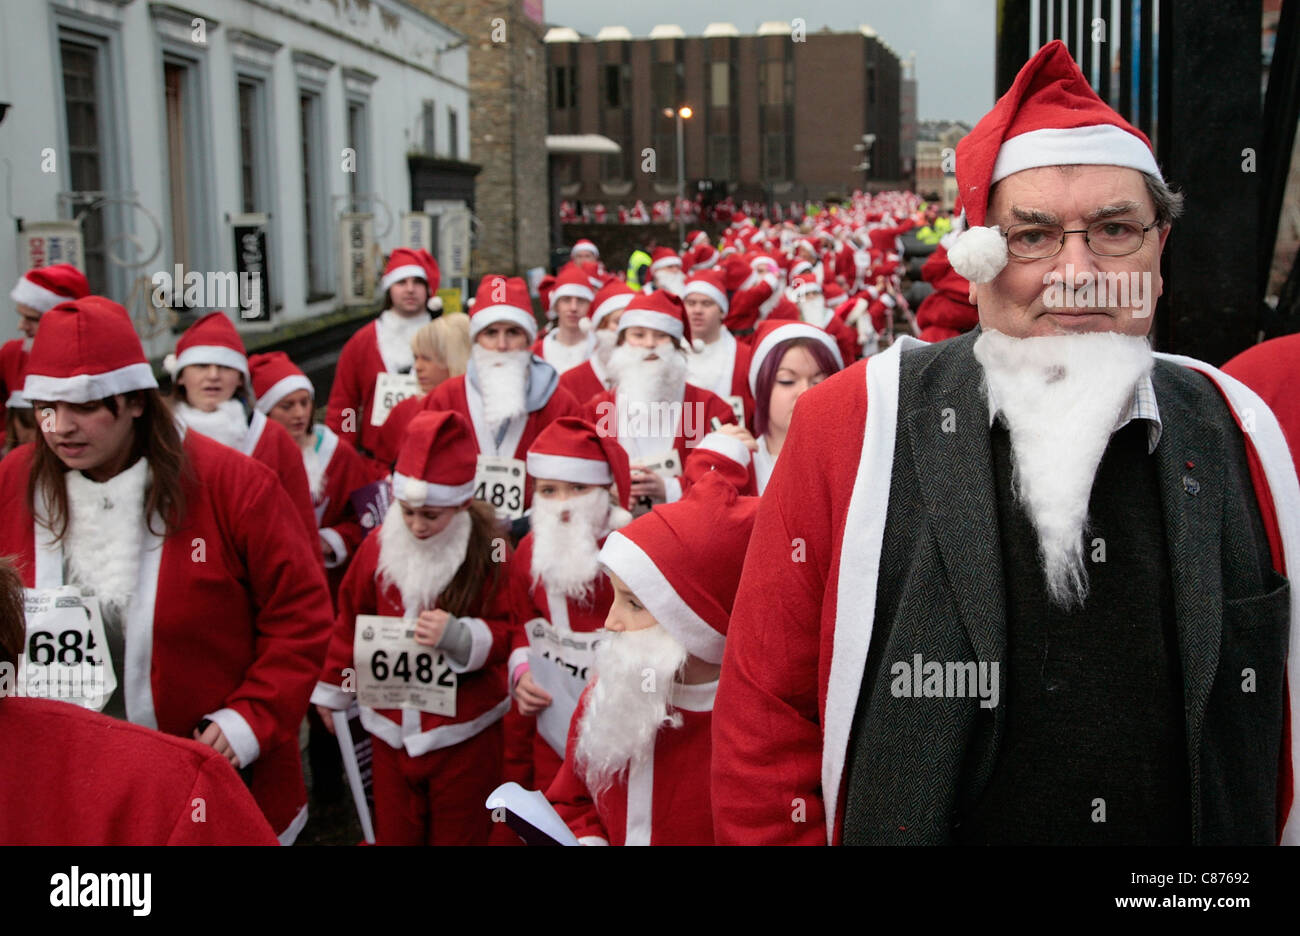 DERRY, UNITED KINGDOM - DECEMBER 09: John Hume. Over 10000 people dressed as santa claus attempt the Guinness World Record in Derry Northern Ireland on Derrys Walls Stock Photo